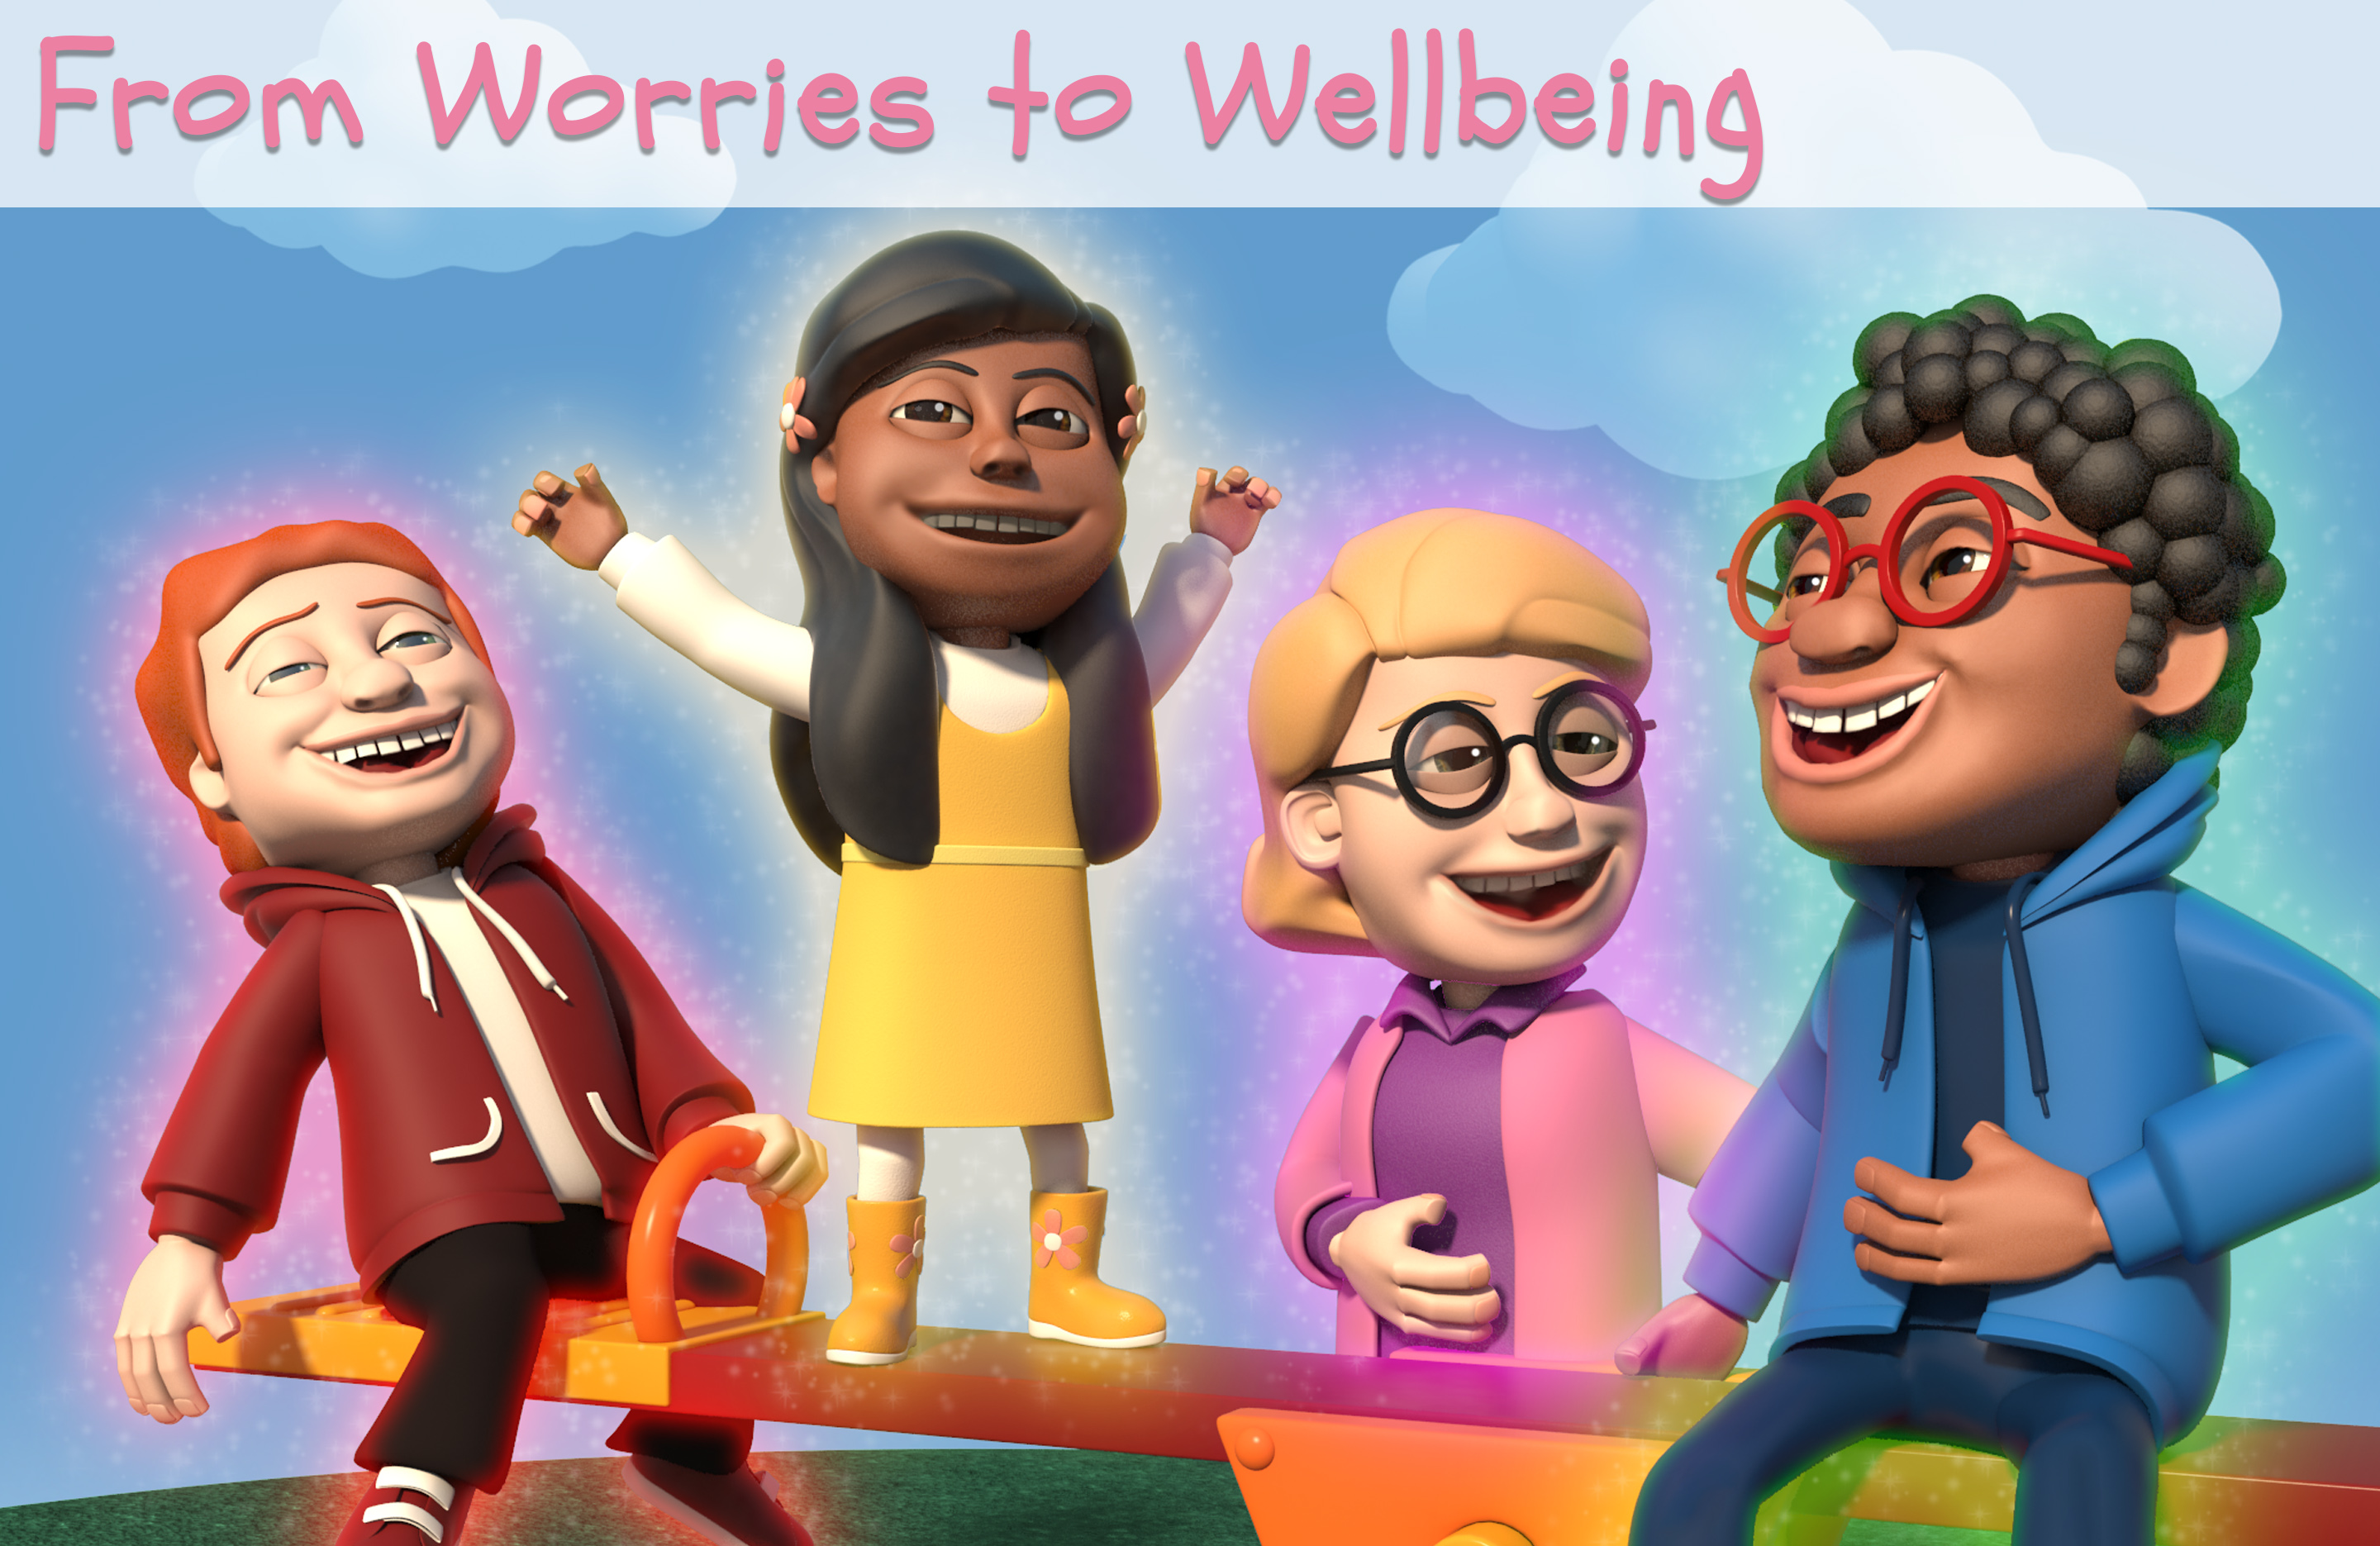 Mental Health & Wellbeing; The Worry WizardFrom Worries to Wellbeing (KS1 & KS2)